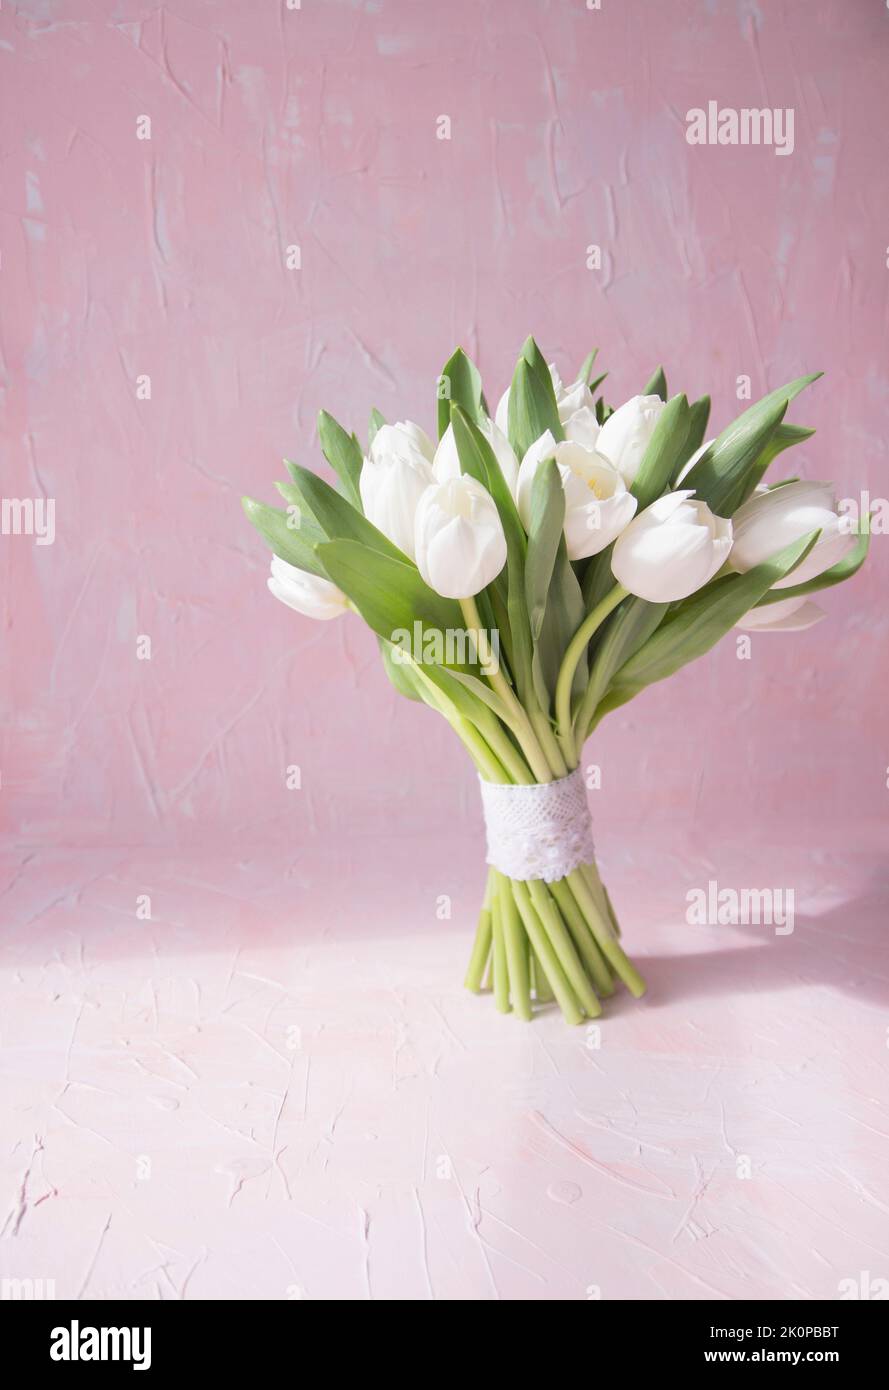 White tulips bouquet flowers and ray of light on vintage pink background. Front view with copy space. Studio shot photo. Stock Photo